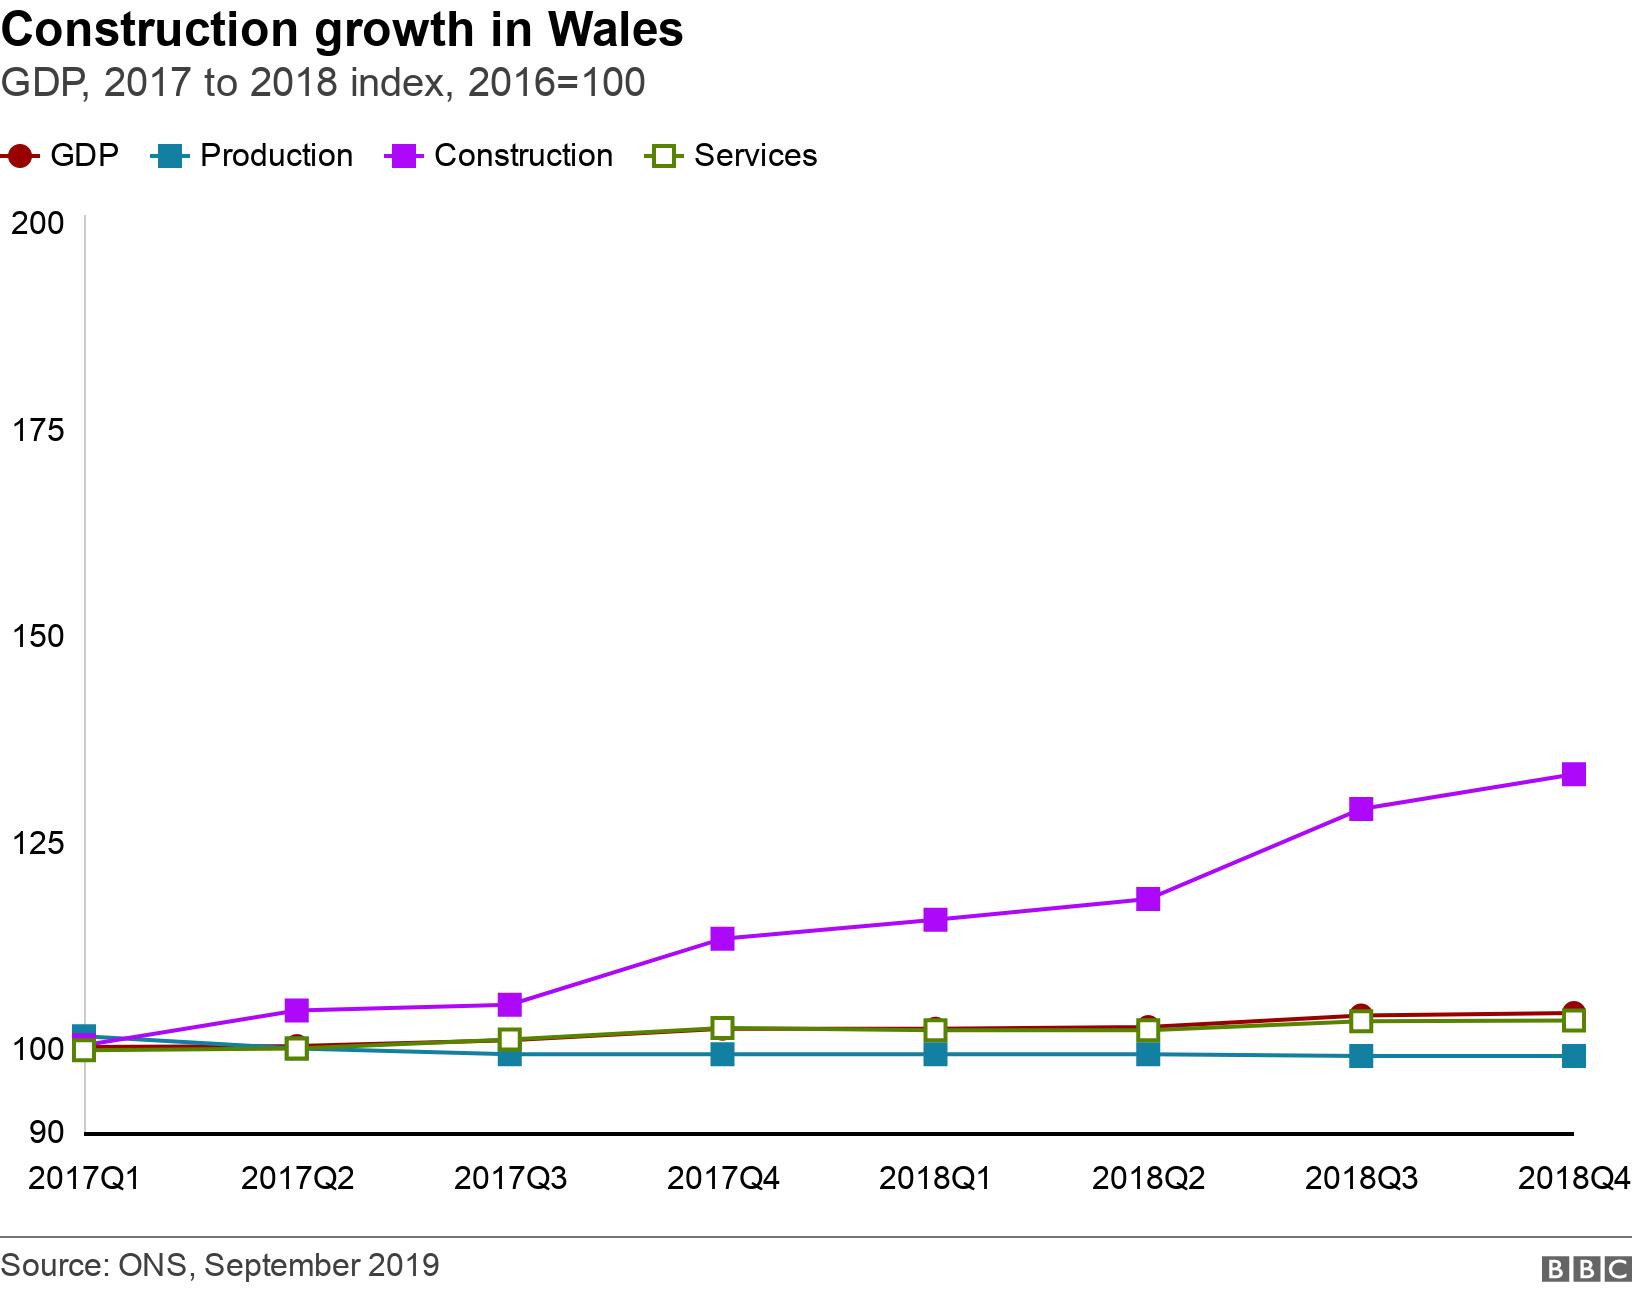 Construction growth in Wales. GDP, 2017 to 2018 index, 2016=100. .